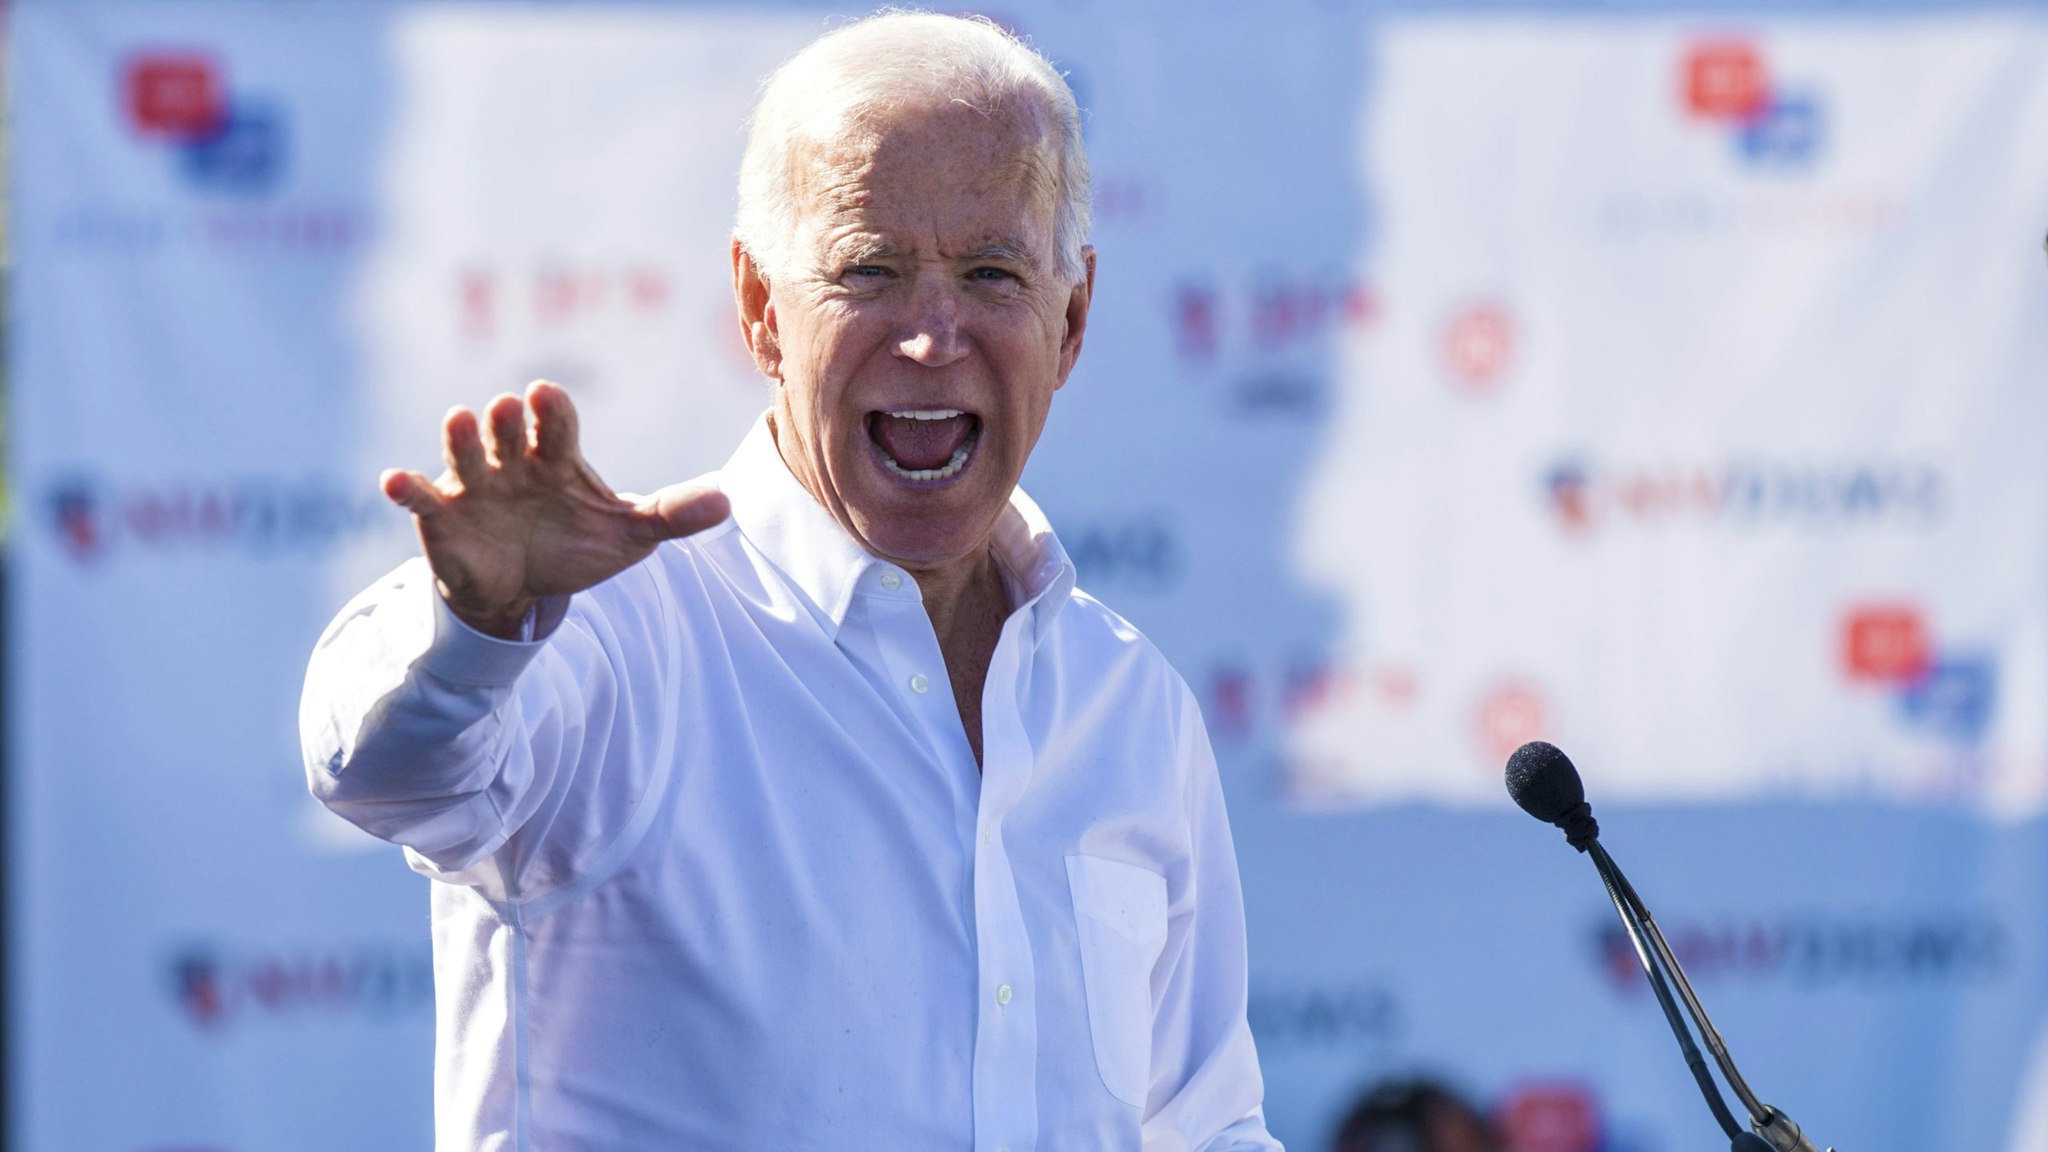 UNITED STATES - OCTOBER 20: Former Vice President Joe Biden speaks at the Nevada Democrats' early vote rally at the Culinary Workers Union Local 226 in Las Vegas on Saturday, Oct. 20, 2018, the first day of early voting in Nevada.